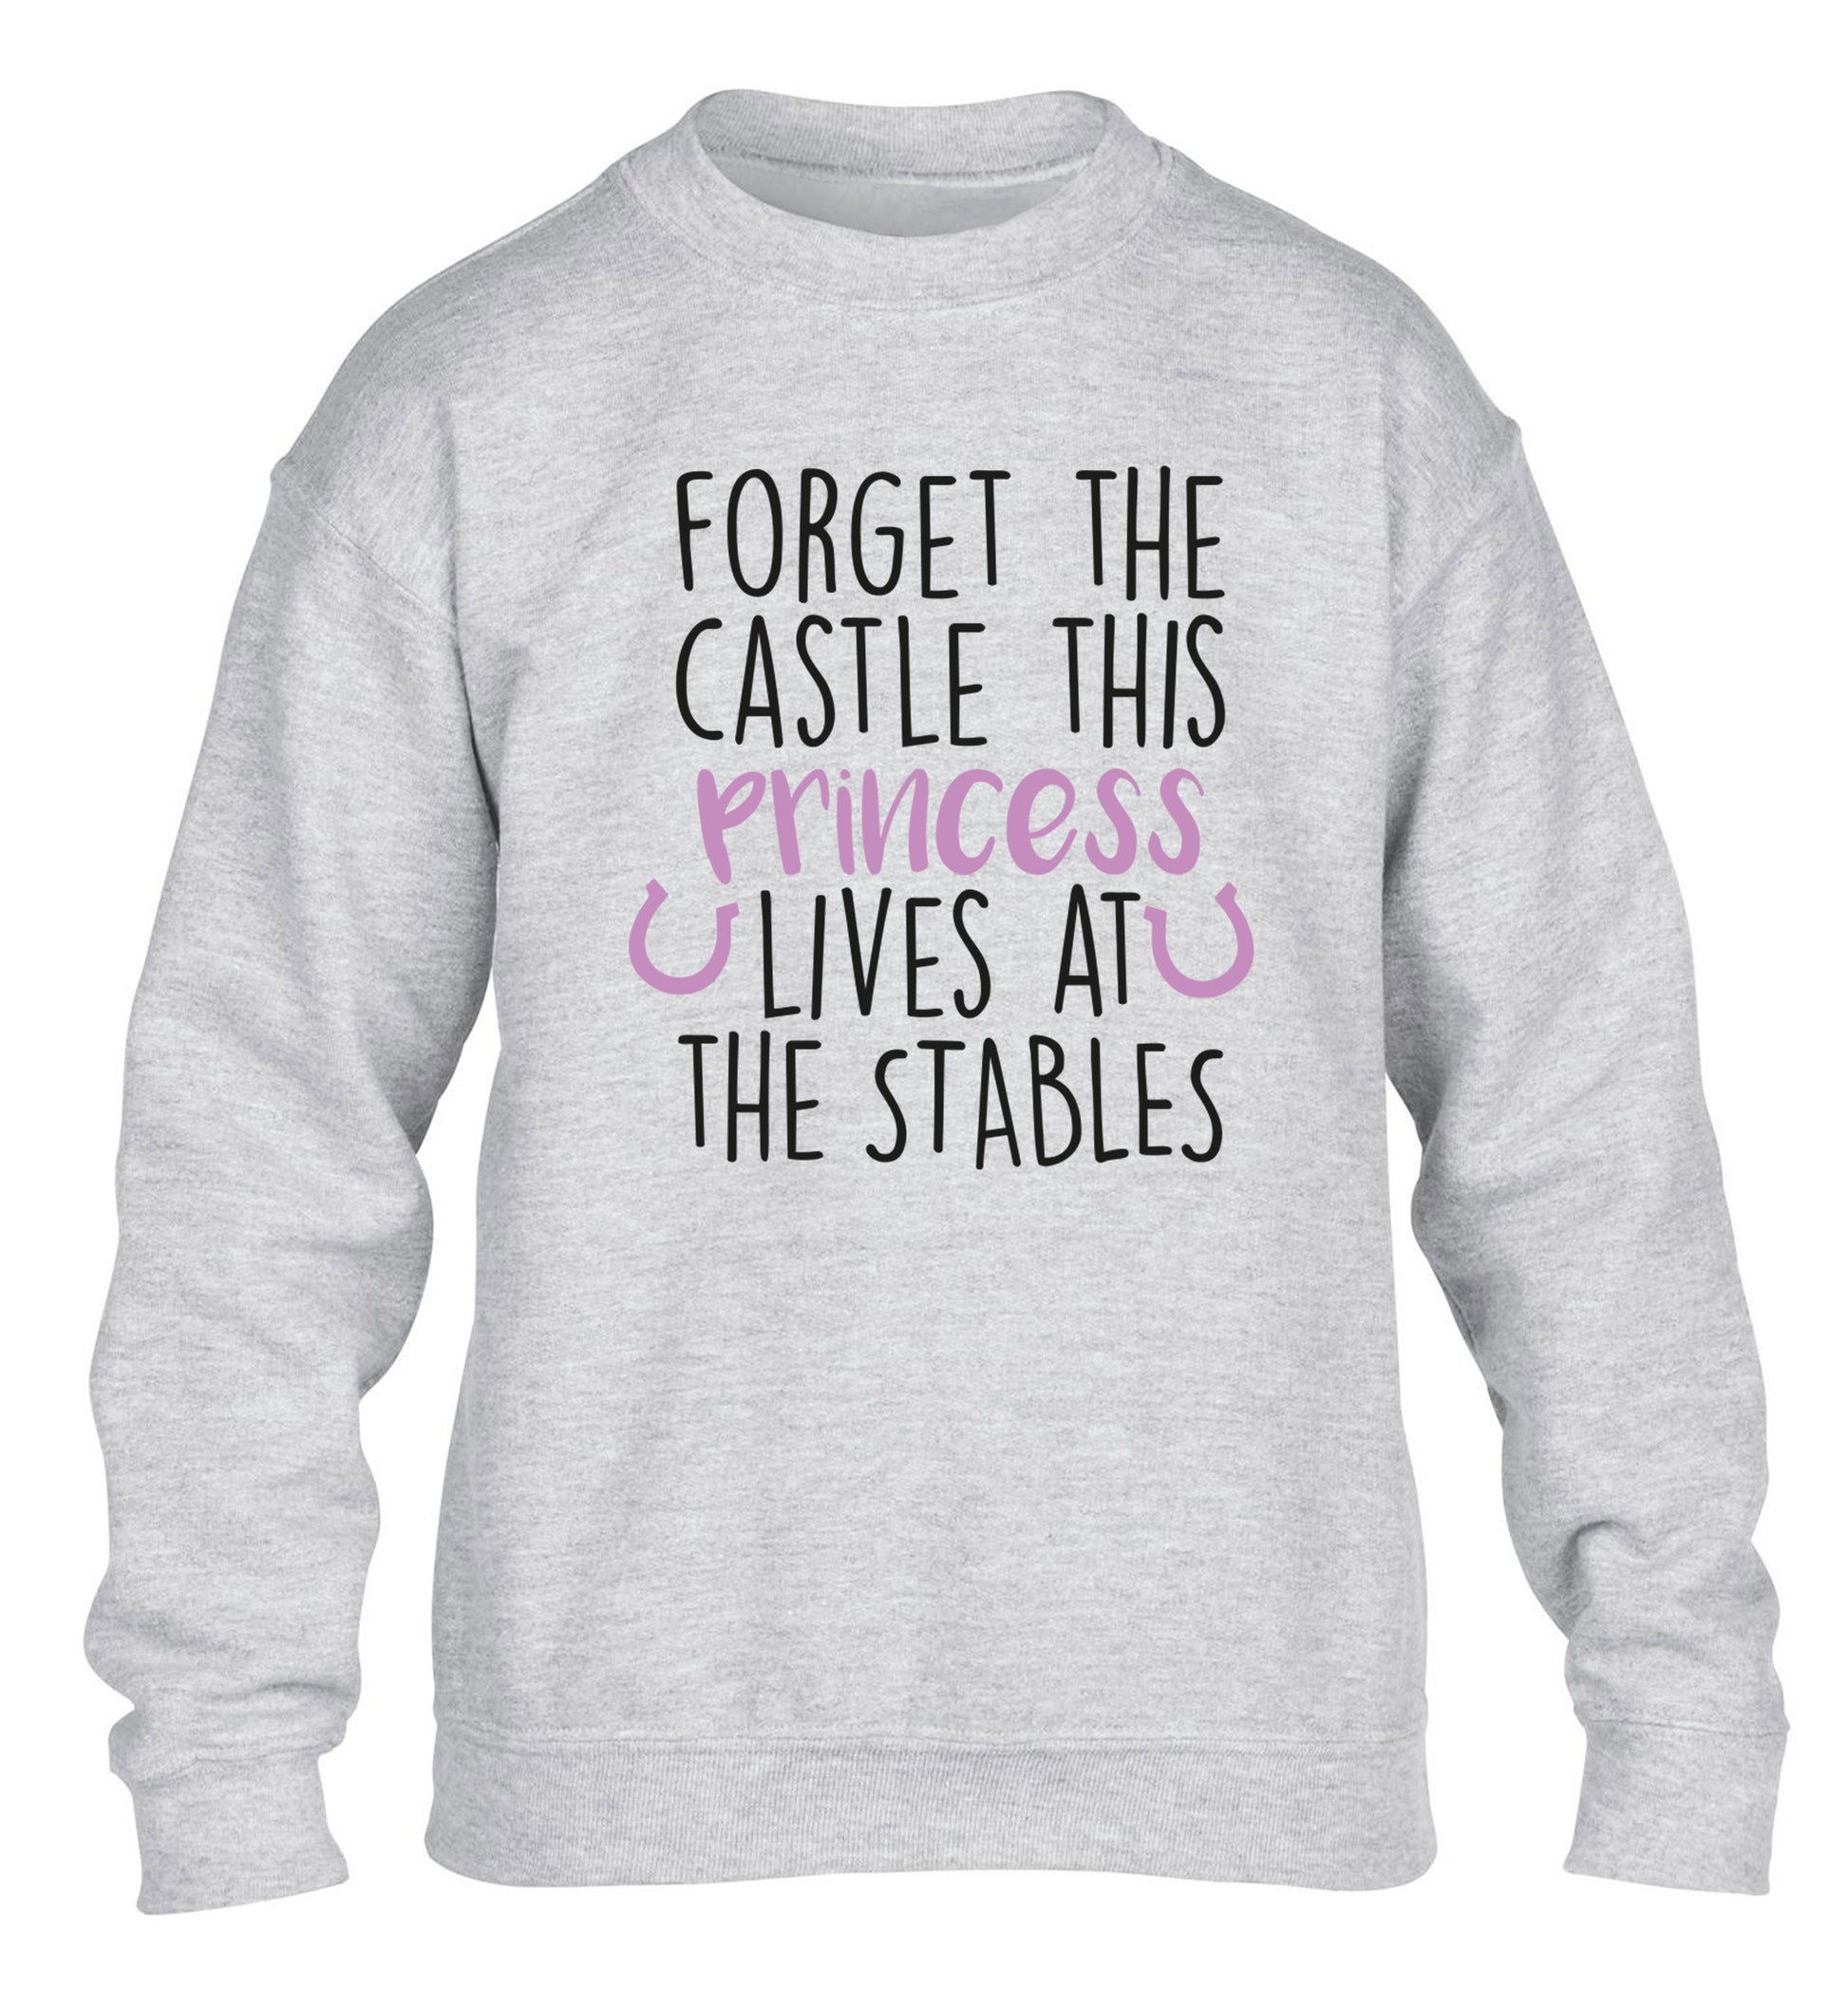 Forget the castle this princess lives at the stables children's grey sweater 12-14 Years